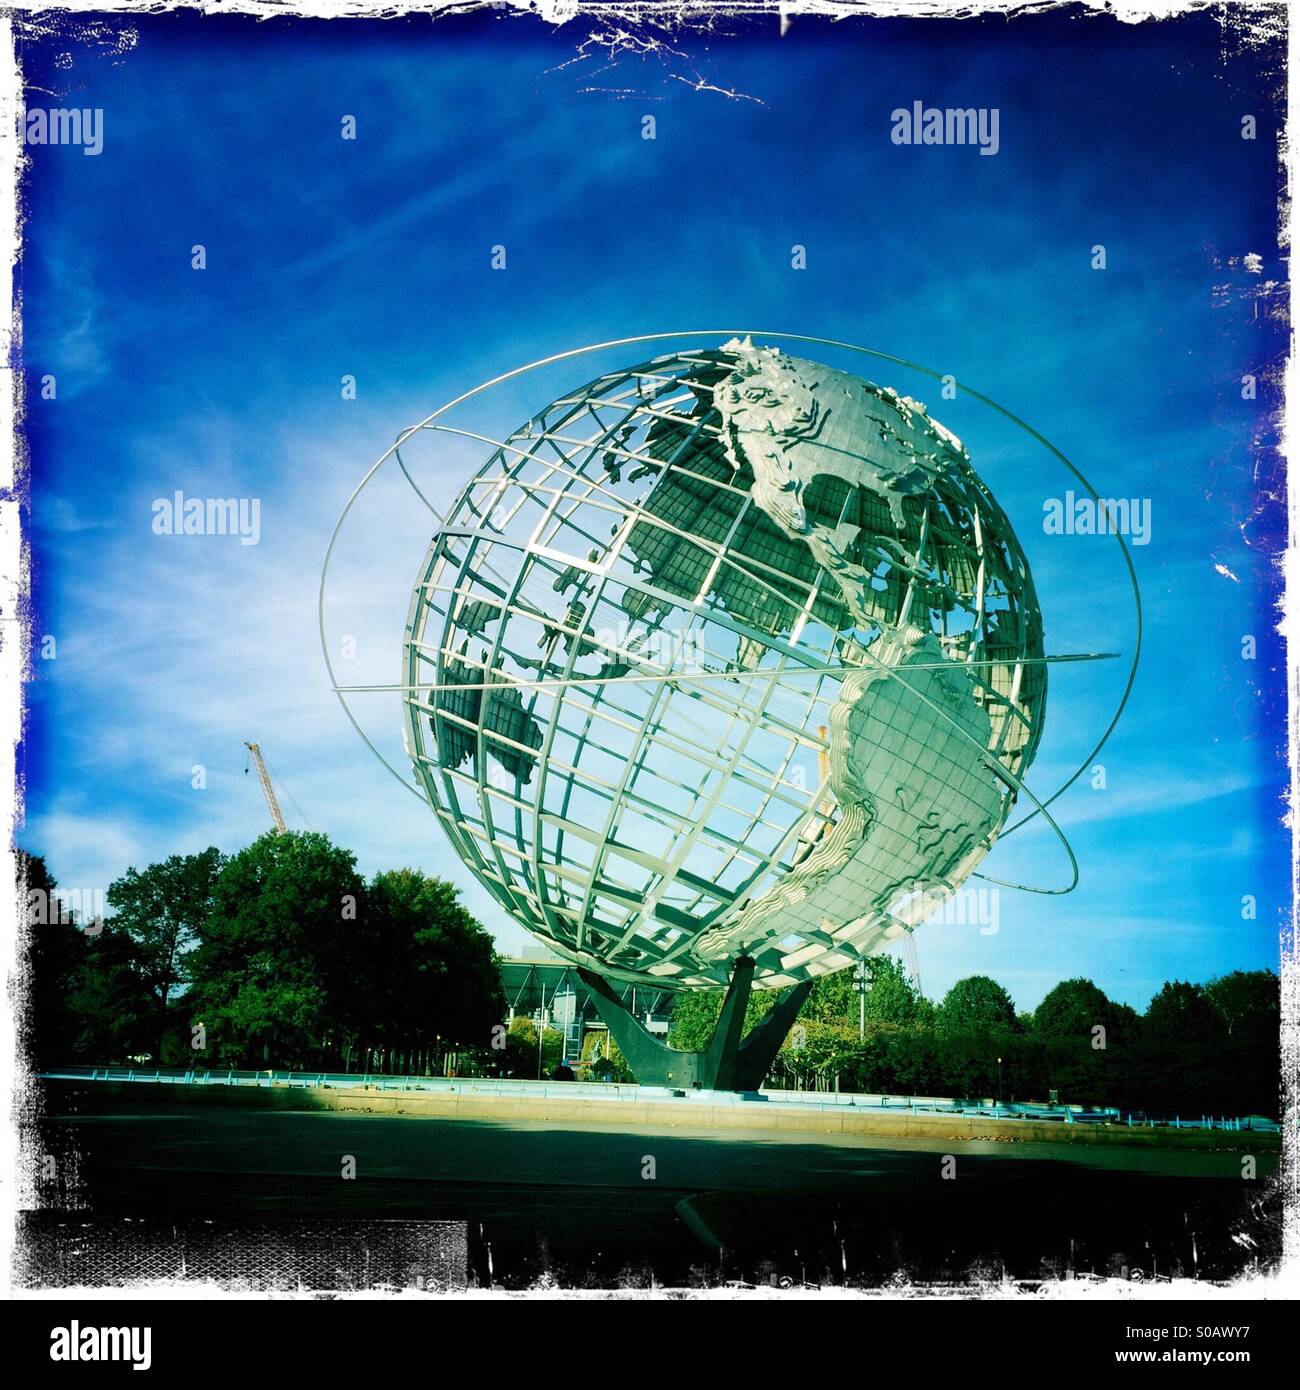 The Unisphere from the 1964 New York World Fair. Stock Photo